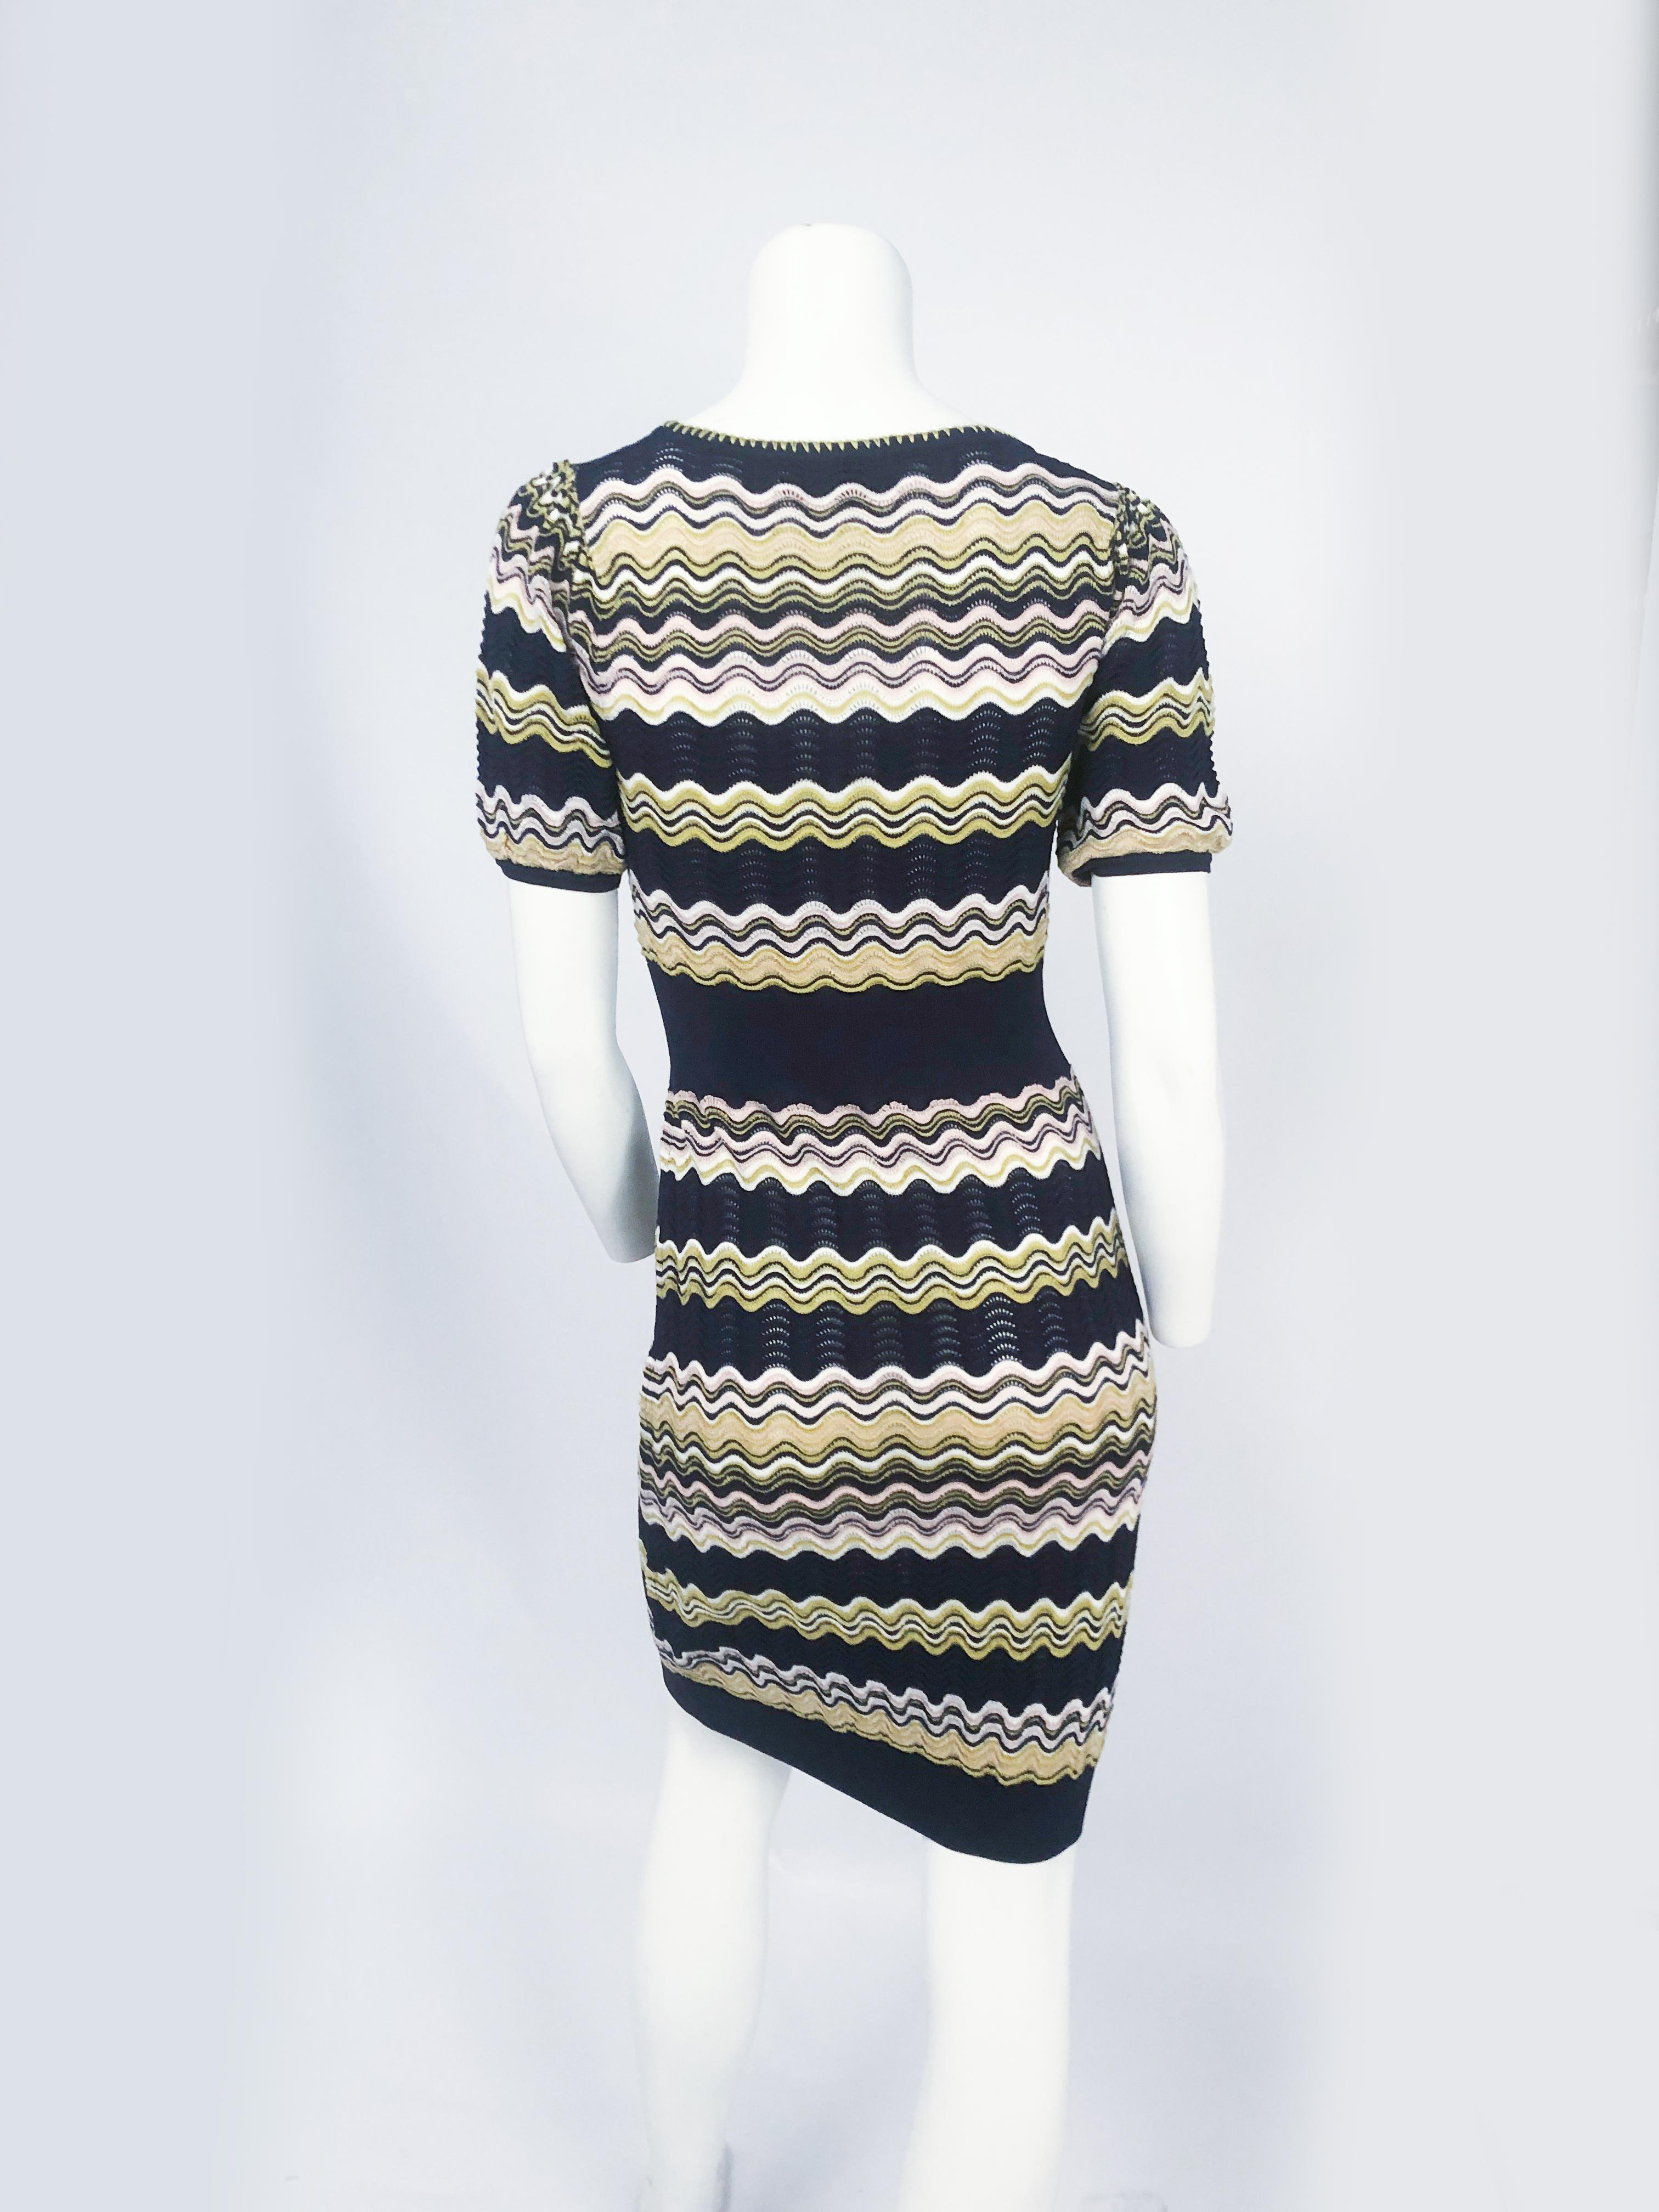 1980s Missoni knit dress with wave texture in navy, chartreuse, and pail rose. Scoop neckline. 